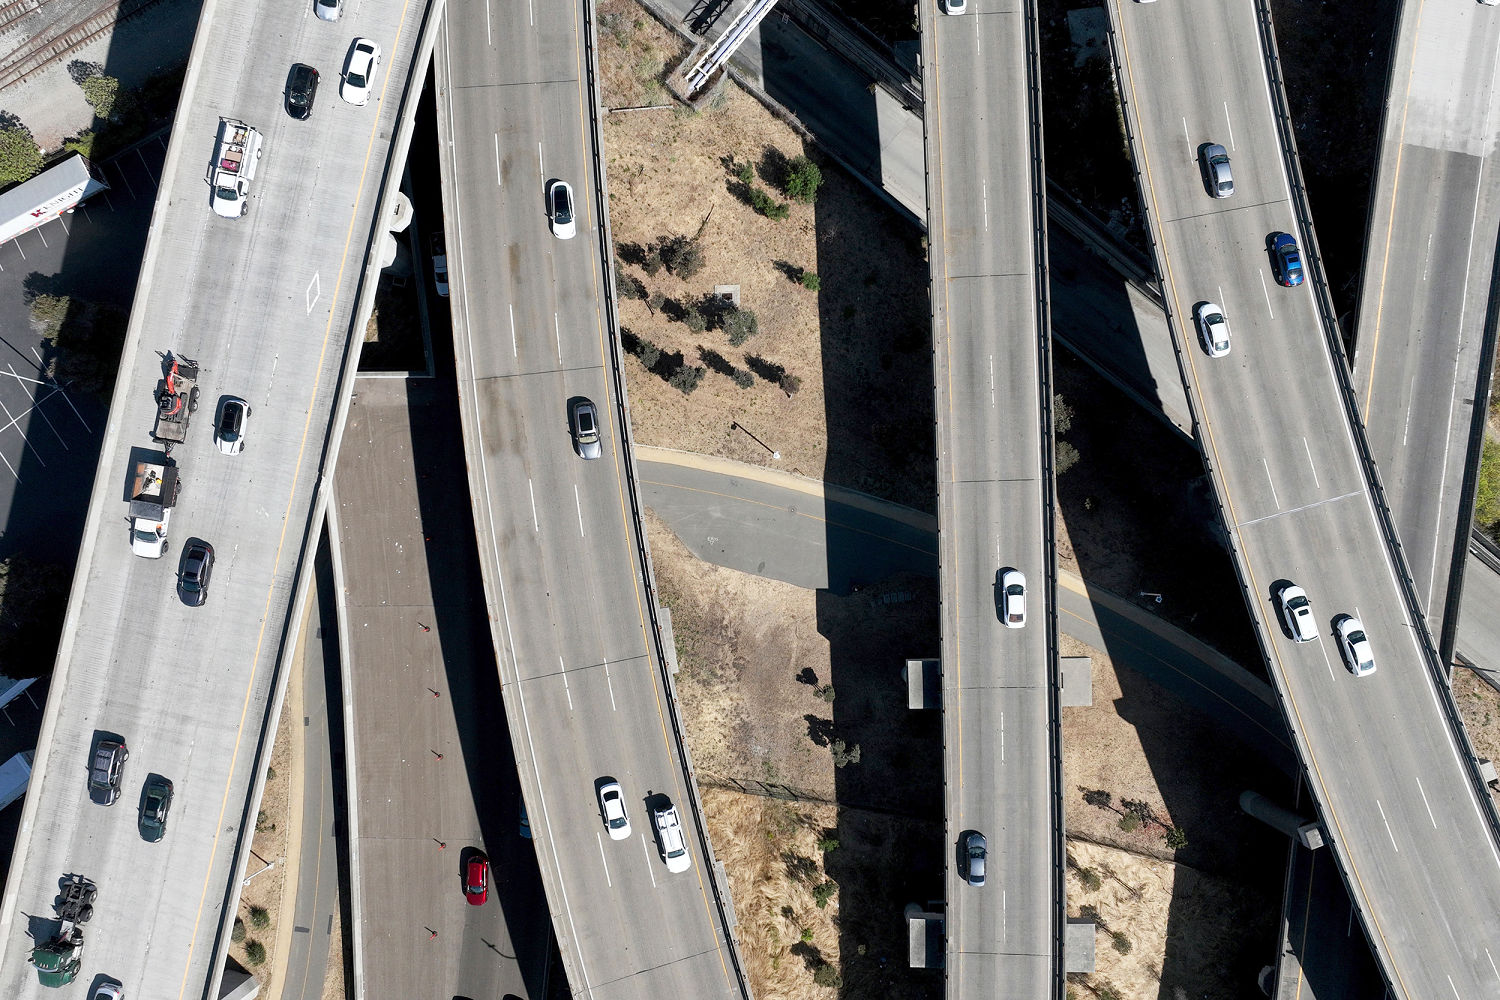 As some countries spurn cars, the U.S. continues to embrace highways